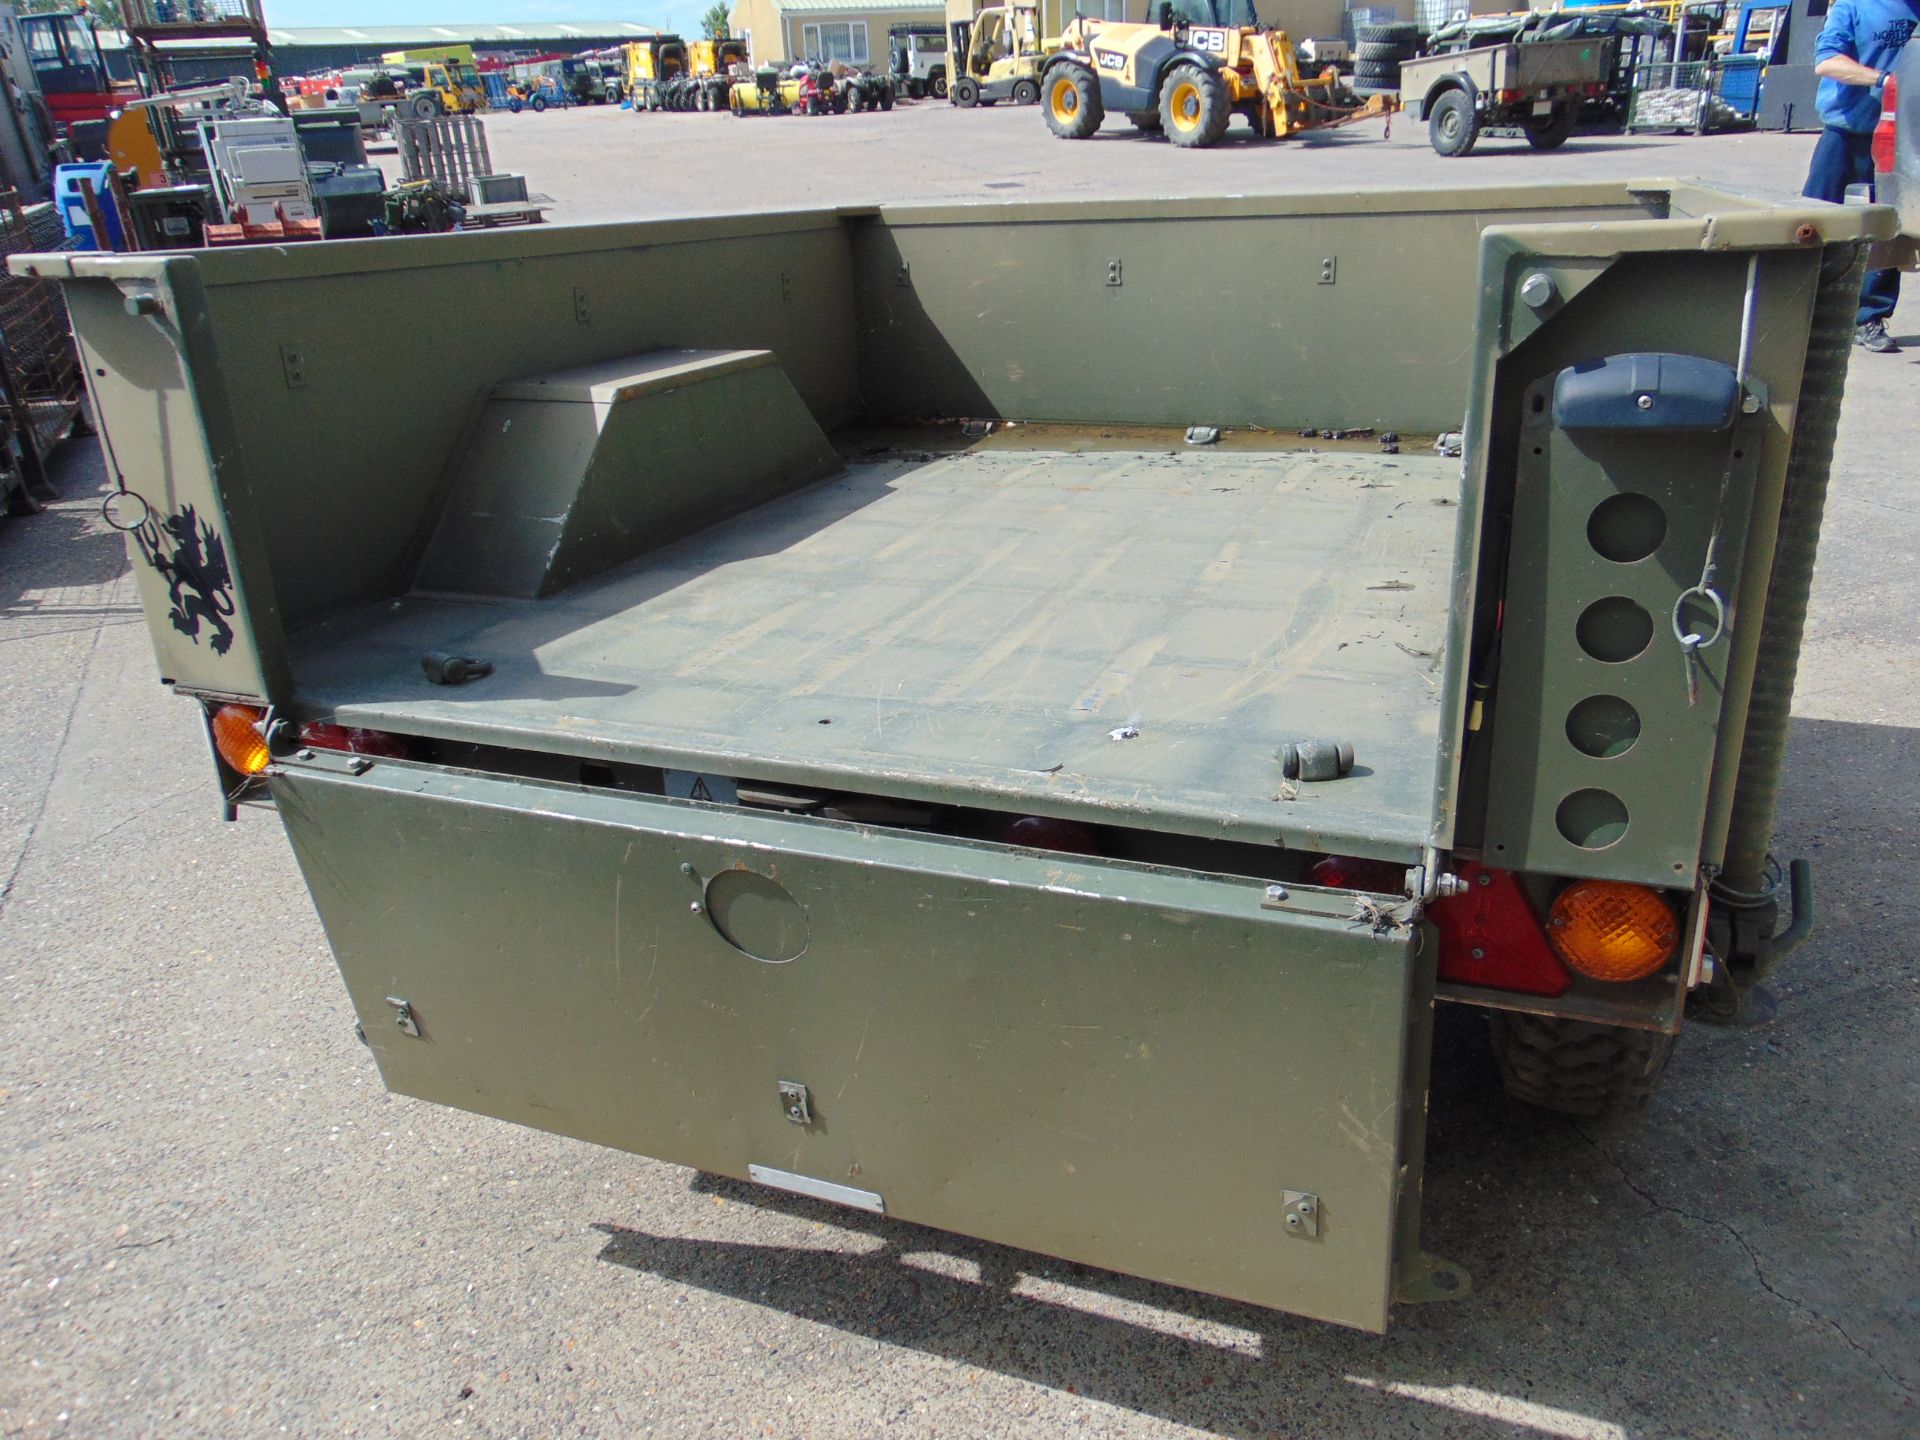 From UK MoD Reserve Stock Penman Trailer GS Light Weight Cargo Land Rover - Image 7 of 15